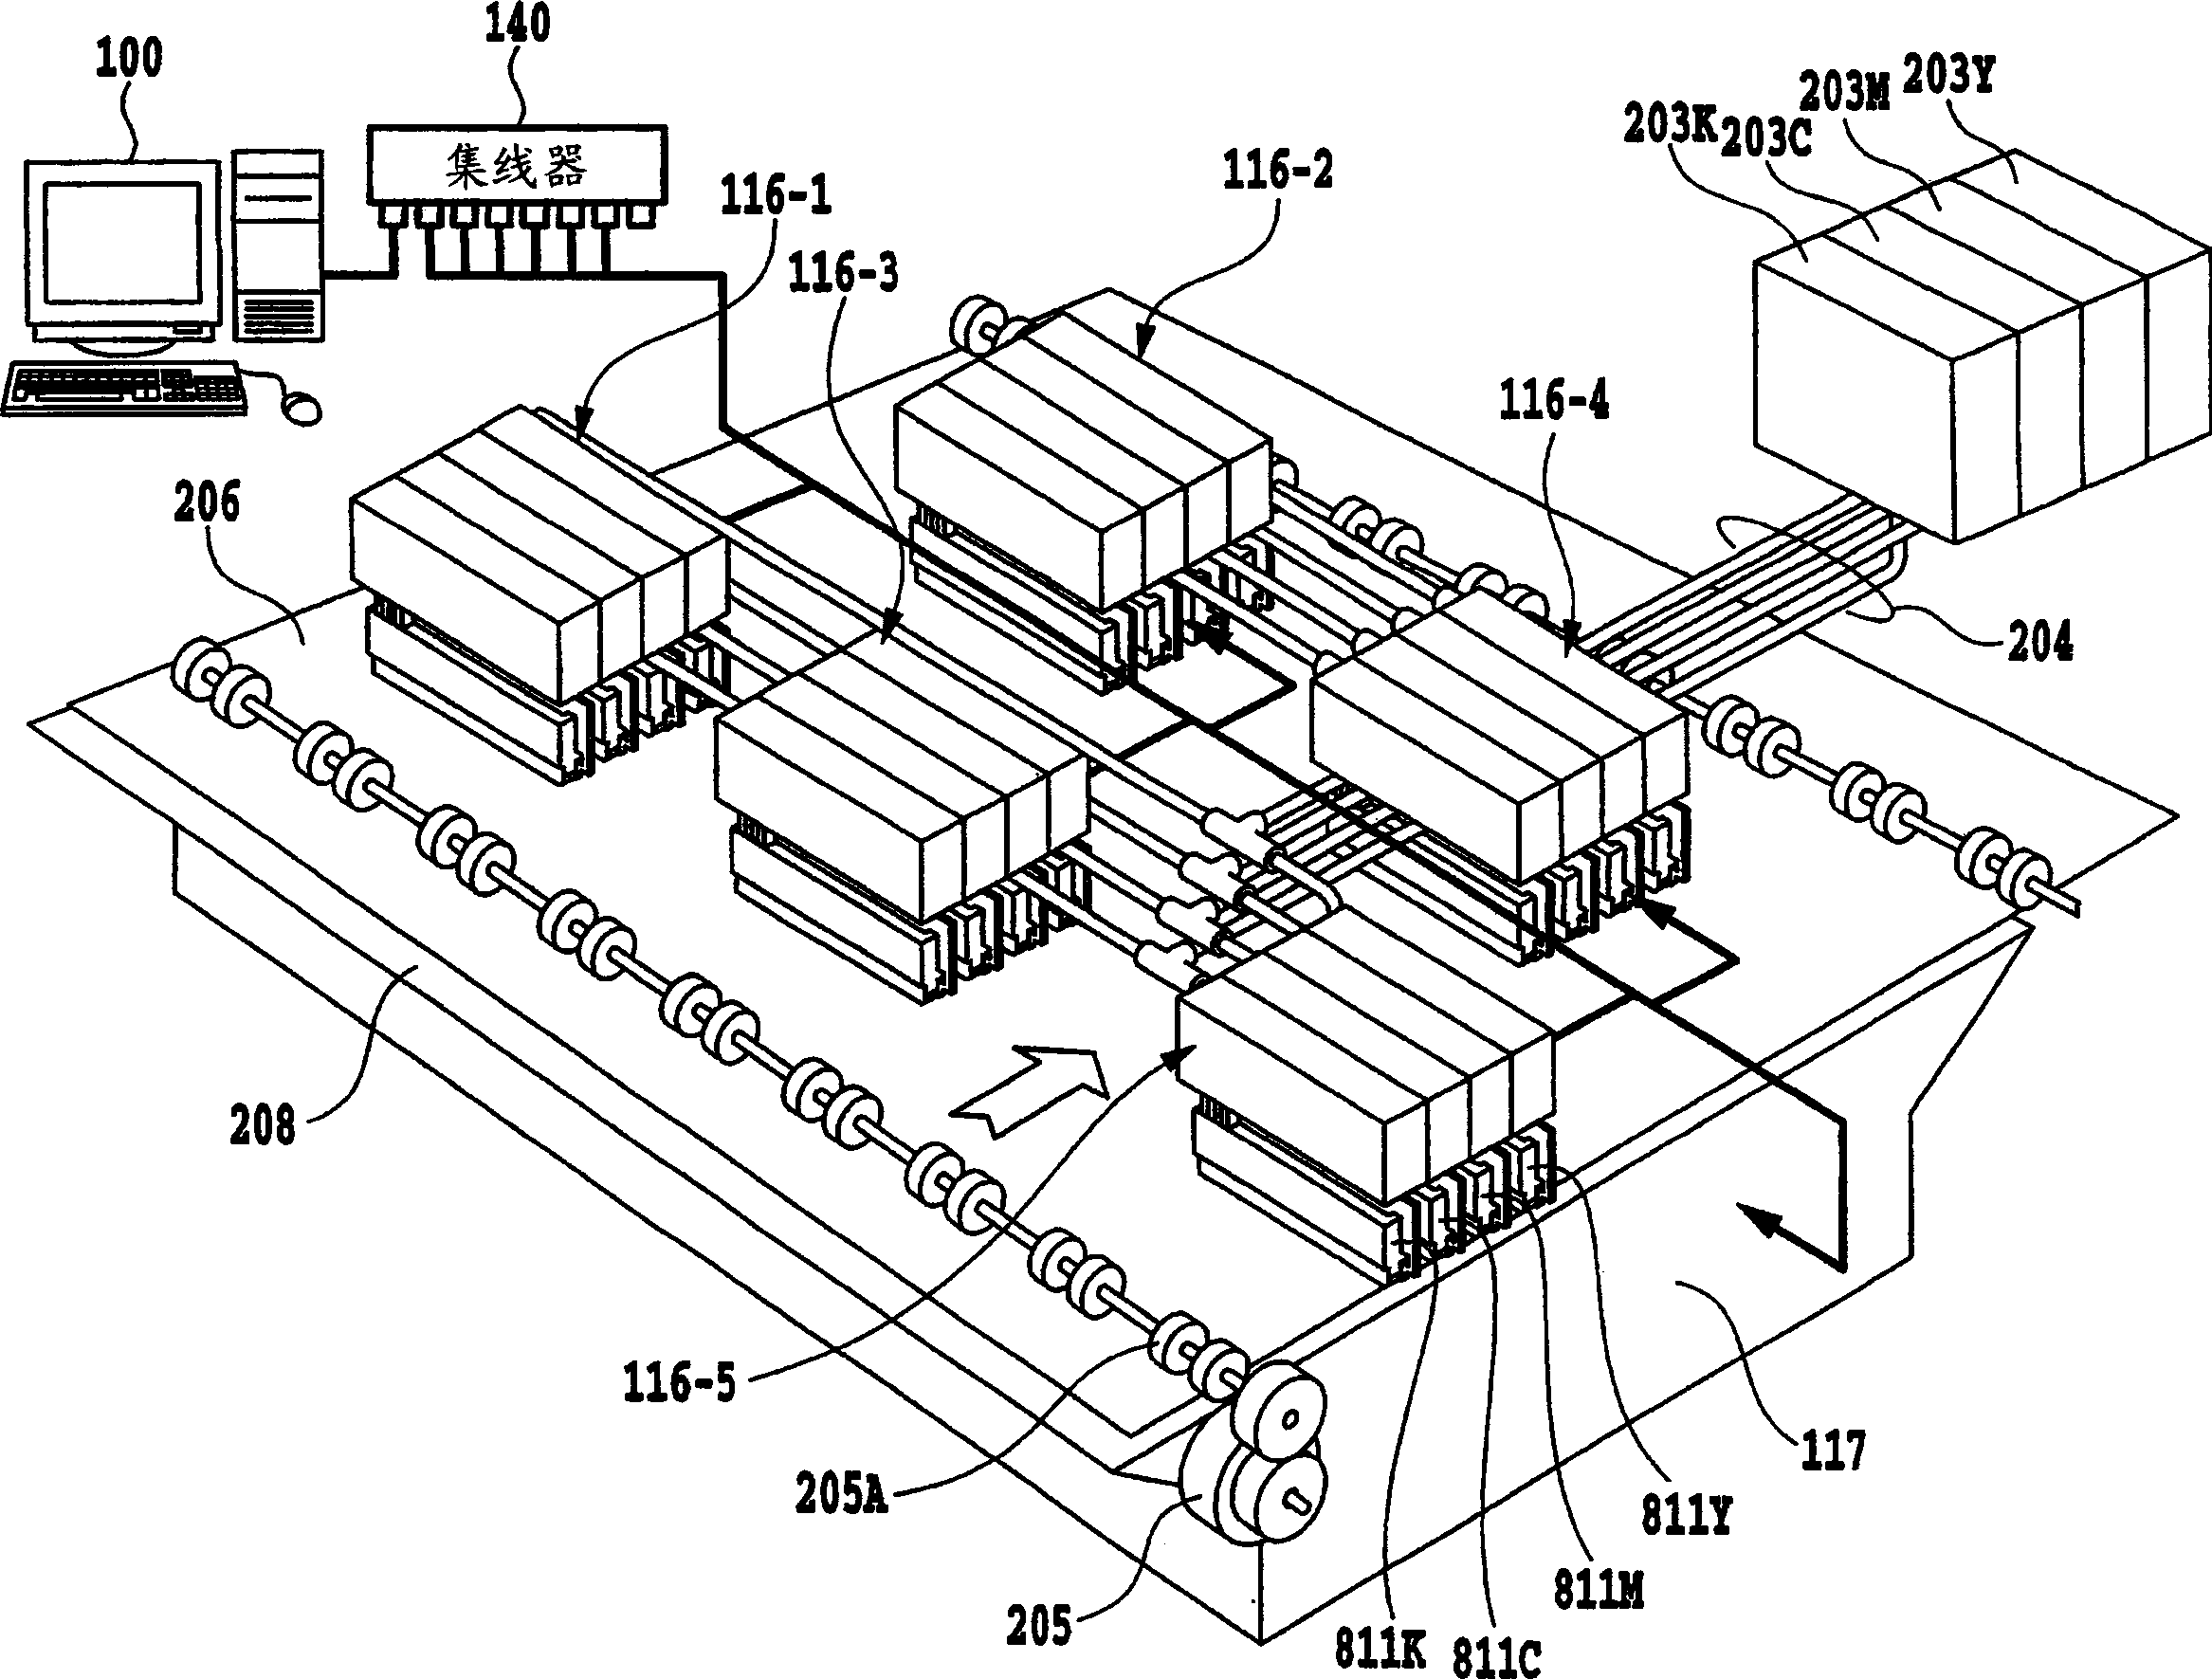 Image forming device, printer complex system and medium conveying device for the device, information processing unit for supplying image data to the image forming device, and image forming system and